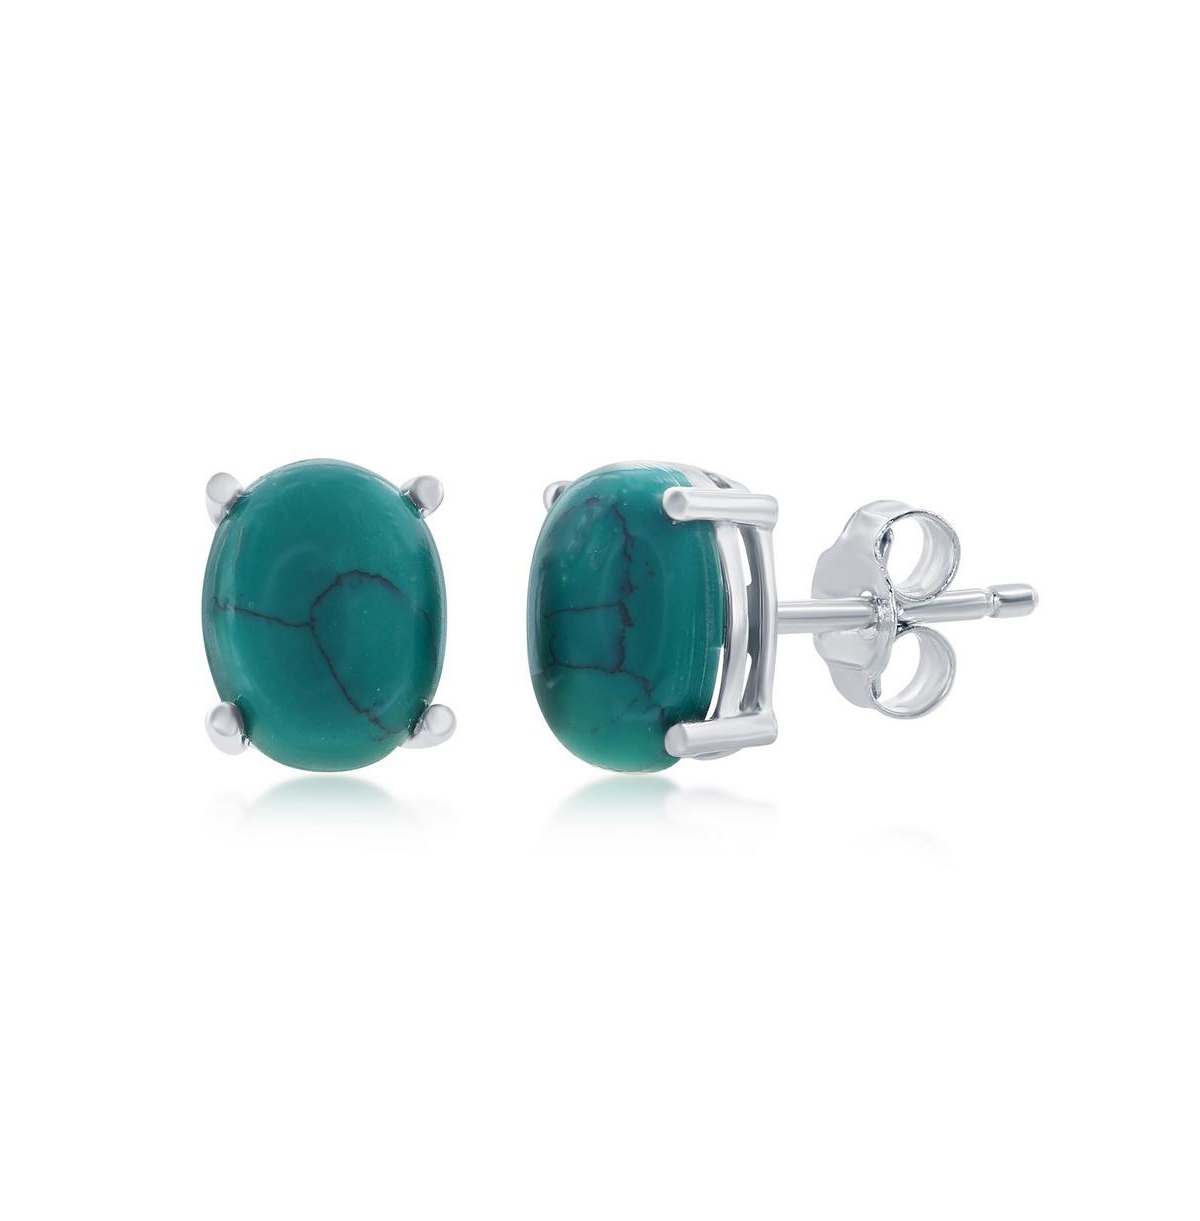 Sterling Silver Oval Turquoise Stud Earrings - Turquoise/aqua